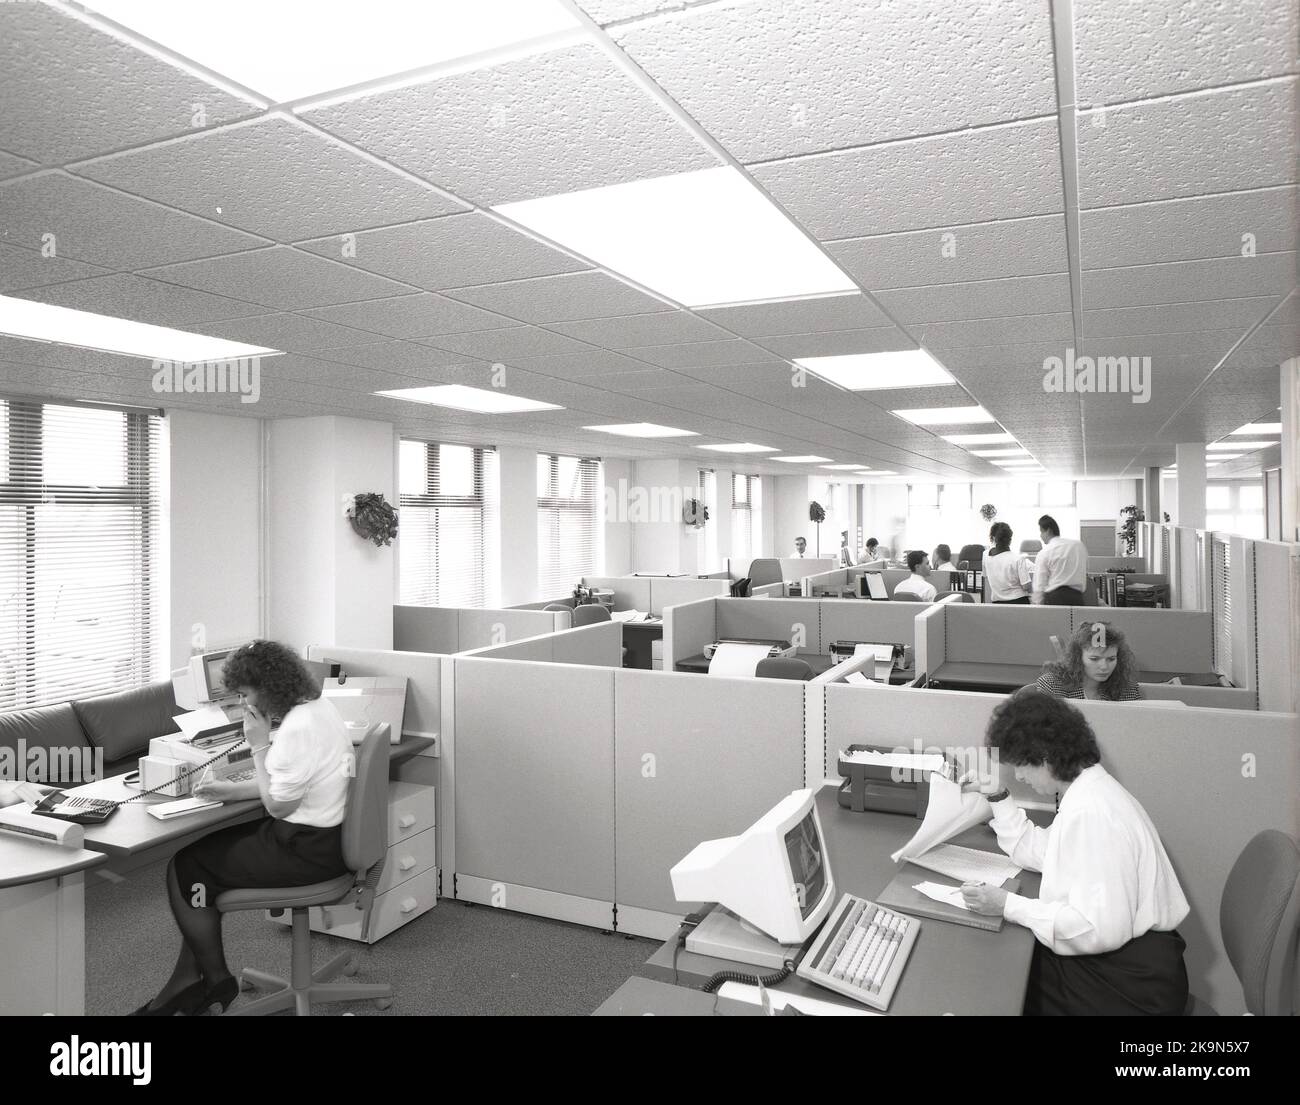 Late 1980s, historical, two female employees working at desks in a shared cubicle, with other shared cubicles on the office floor, in a working set-up common in this era, England, UK. Seen in the picture, personal computers, including an IBM. Stock Photo